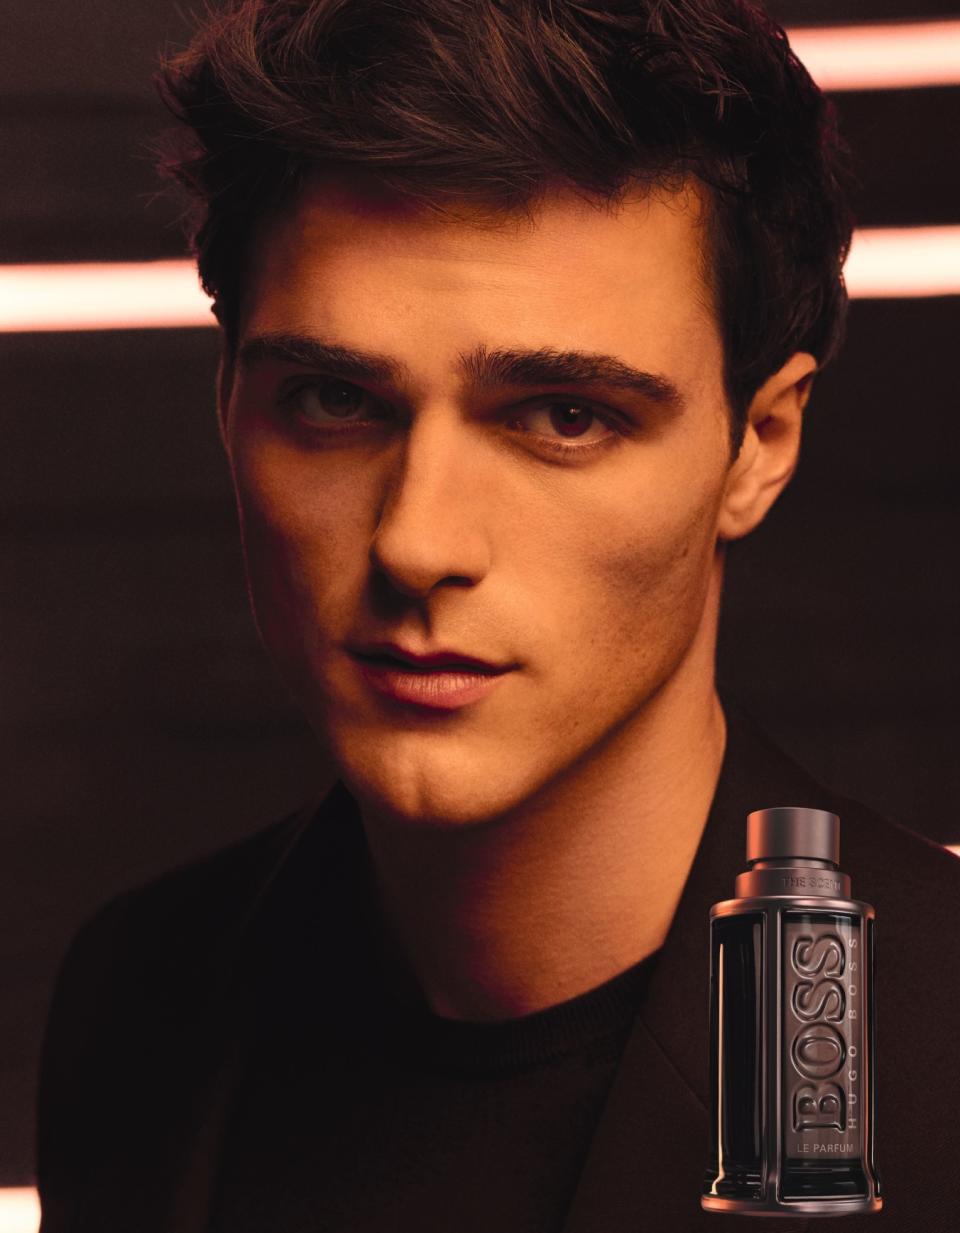 Jacob Elordi in the new Boss The Scent campaign.